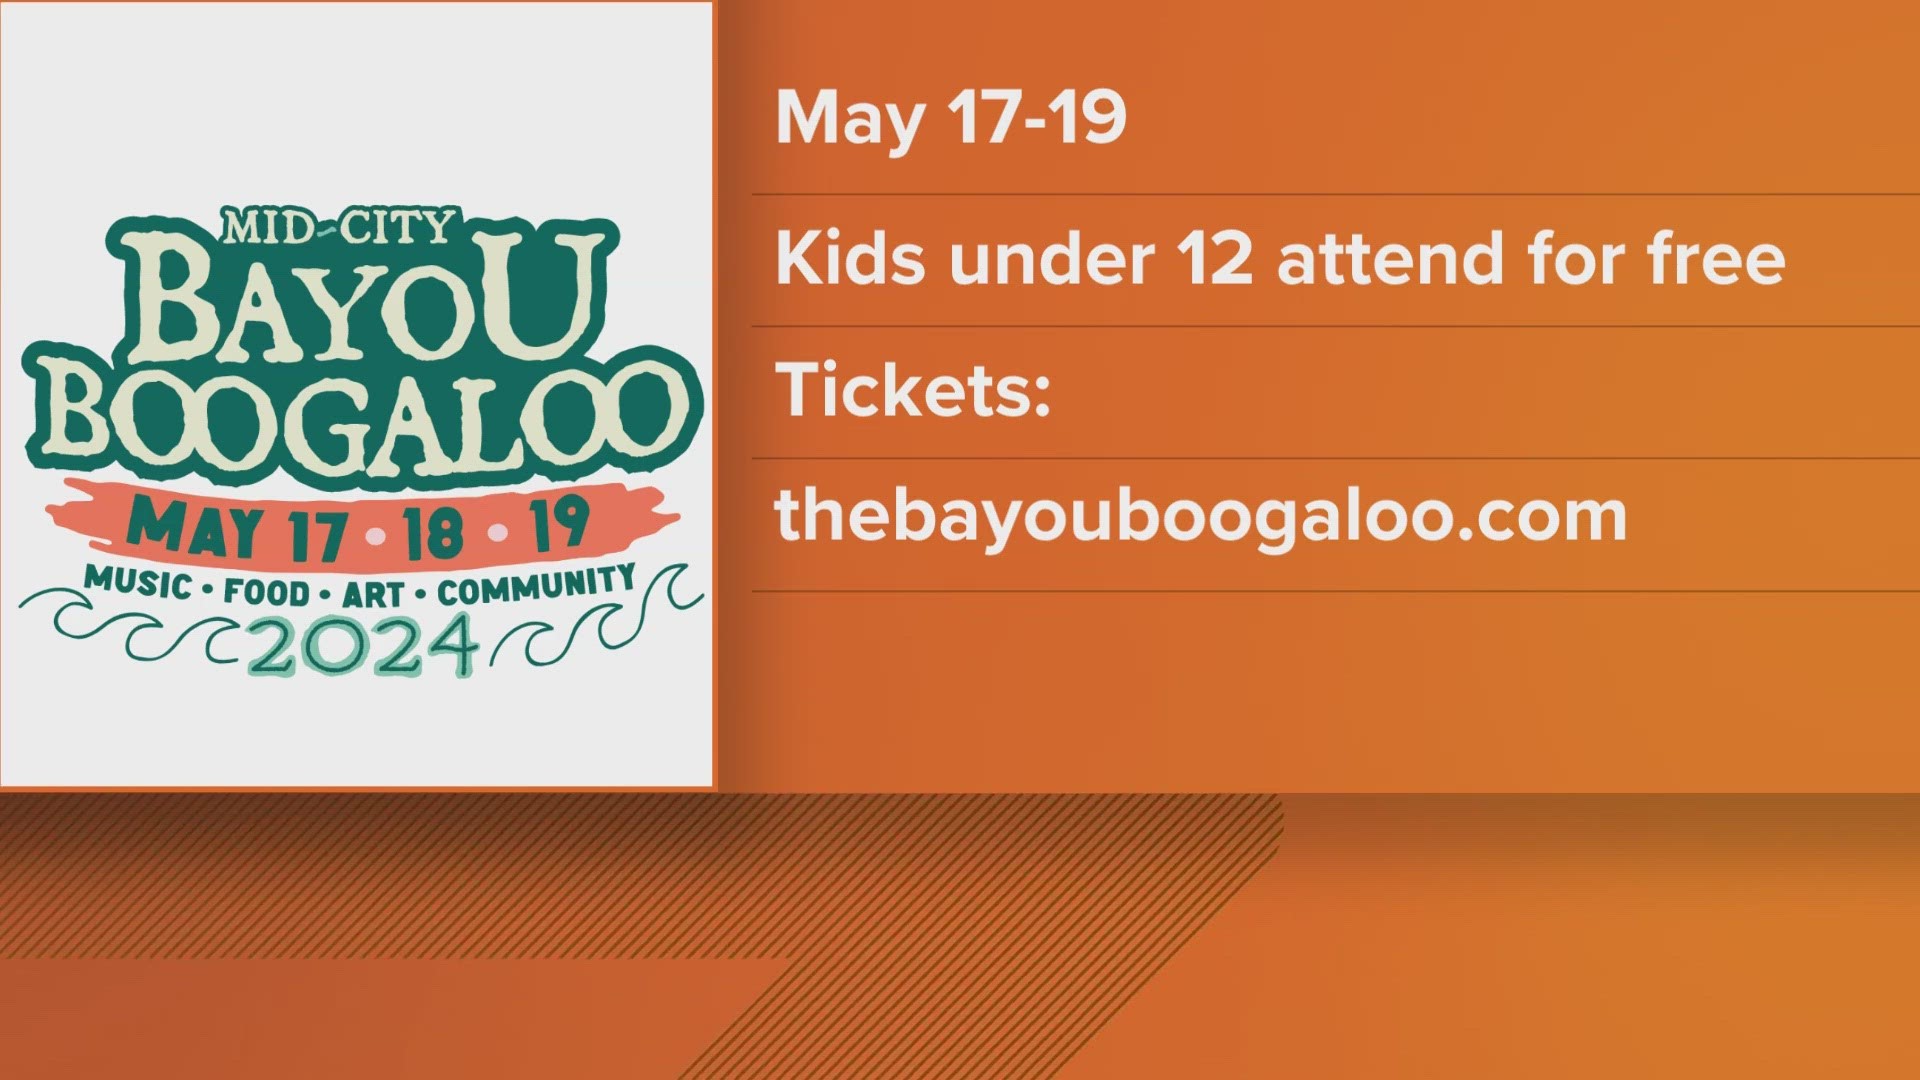 What is the Mid-City Bayou Boogaloo? Truly unique, affordable neighborhood music festival on the beautiful banks of Bayou St. John, Friday, May 17 through Sunday.